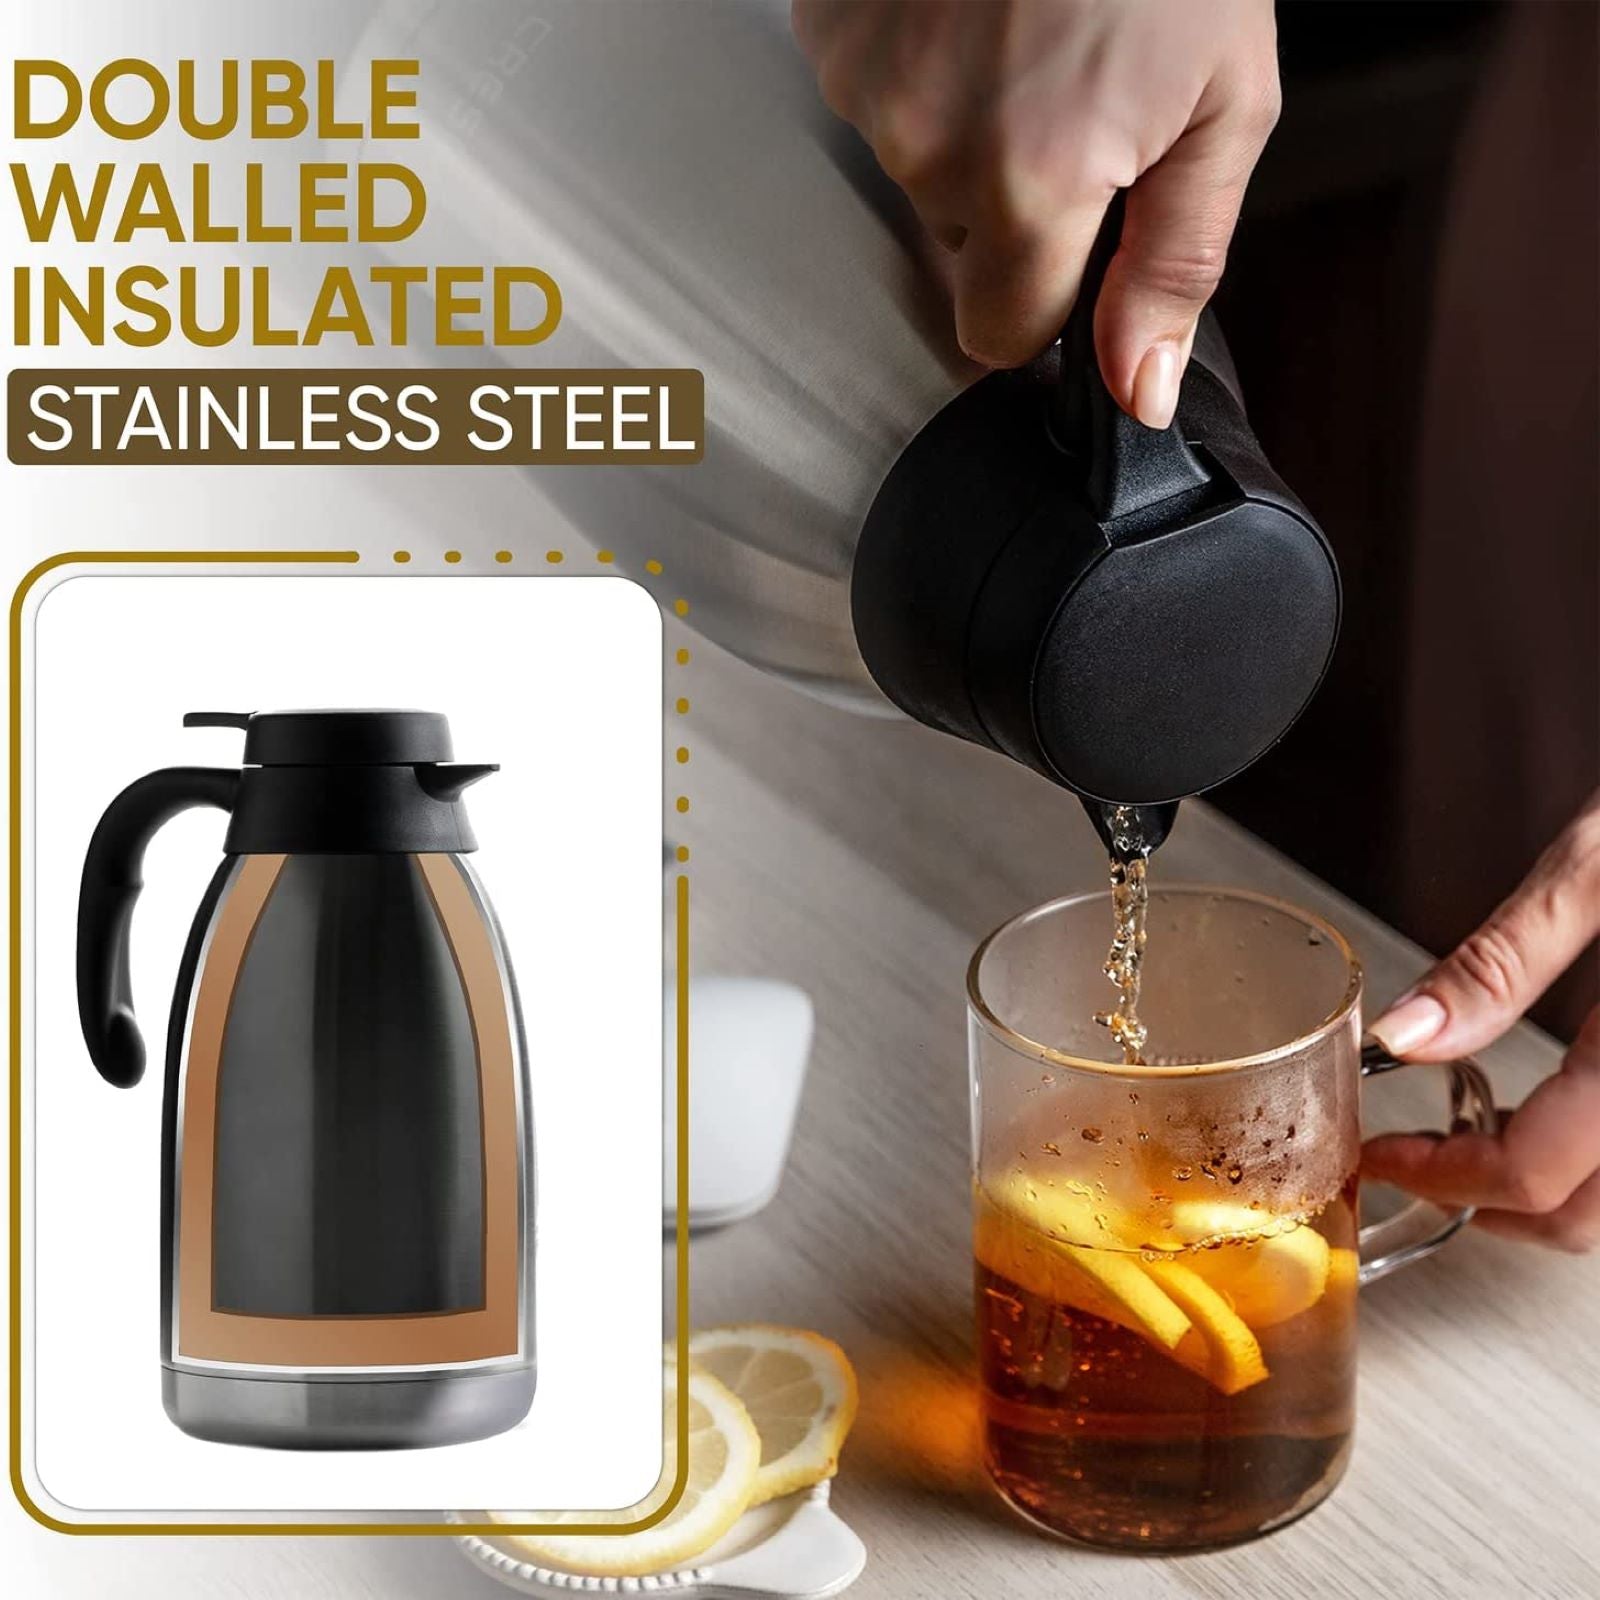 Coffee carafe & Tea carafe in one. 68oz 12hr heat retention ideal for  coffee carafes for keeping hot, 24hr cold retention. Thermal Stainless  Steel